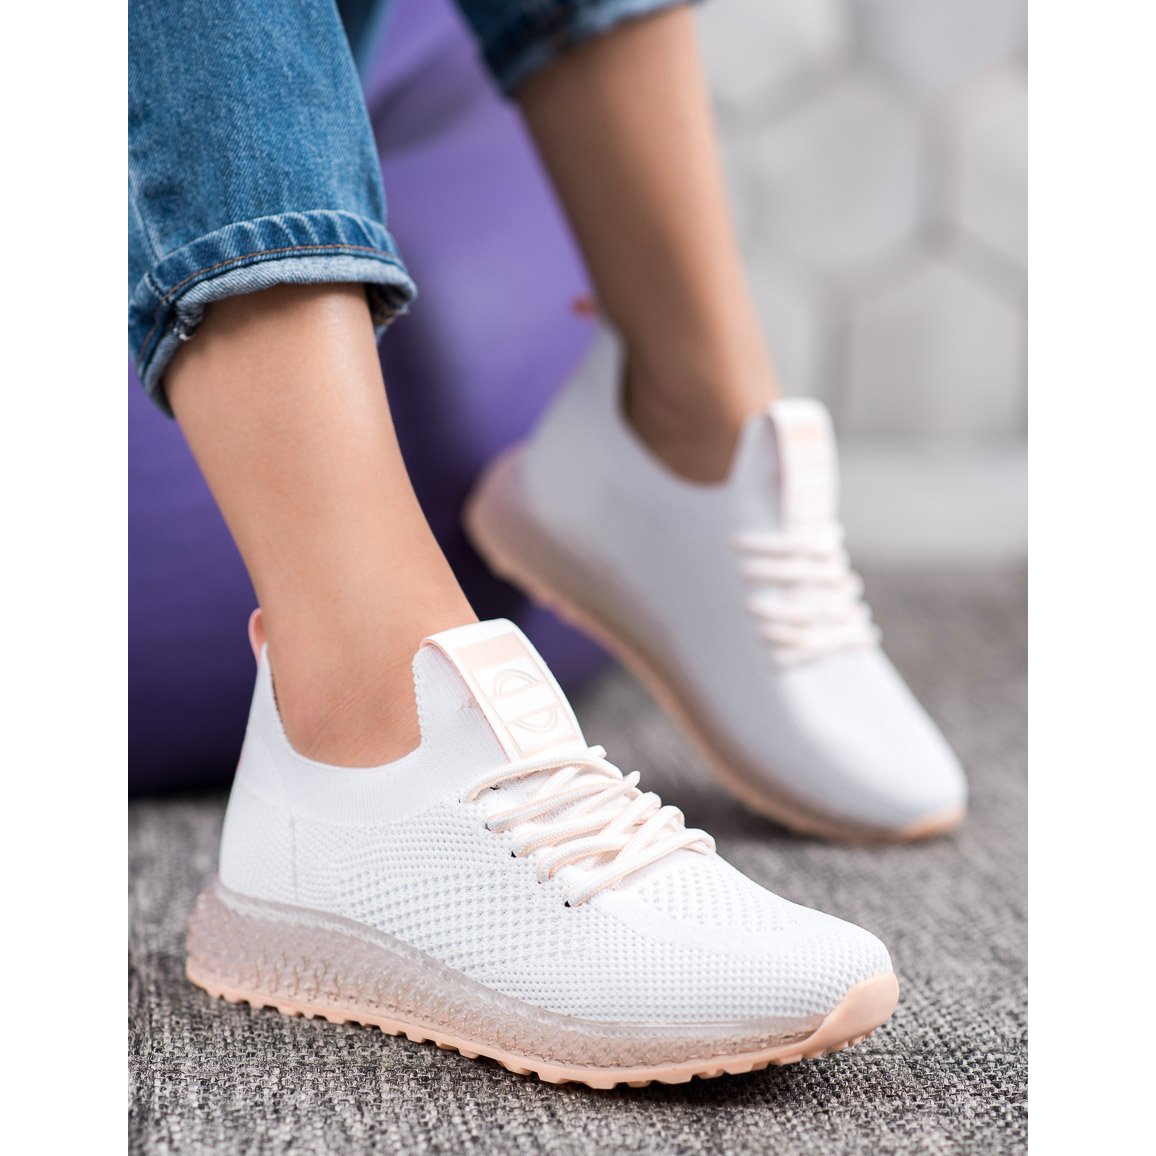 Shoes Women Sneakers Fashion Transparent Sole Design Light Color Summer  Chunky Luxury Casual Sports Lace-up Basic Walking Shoes